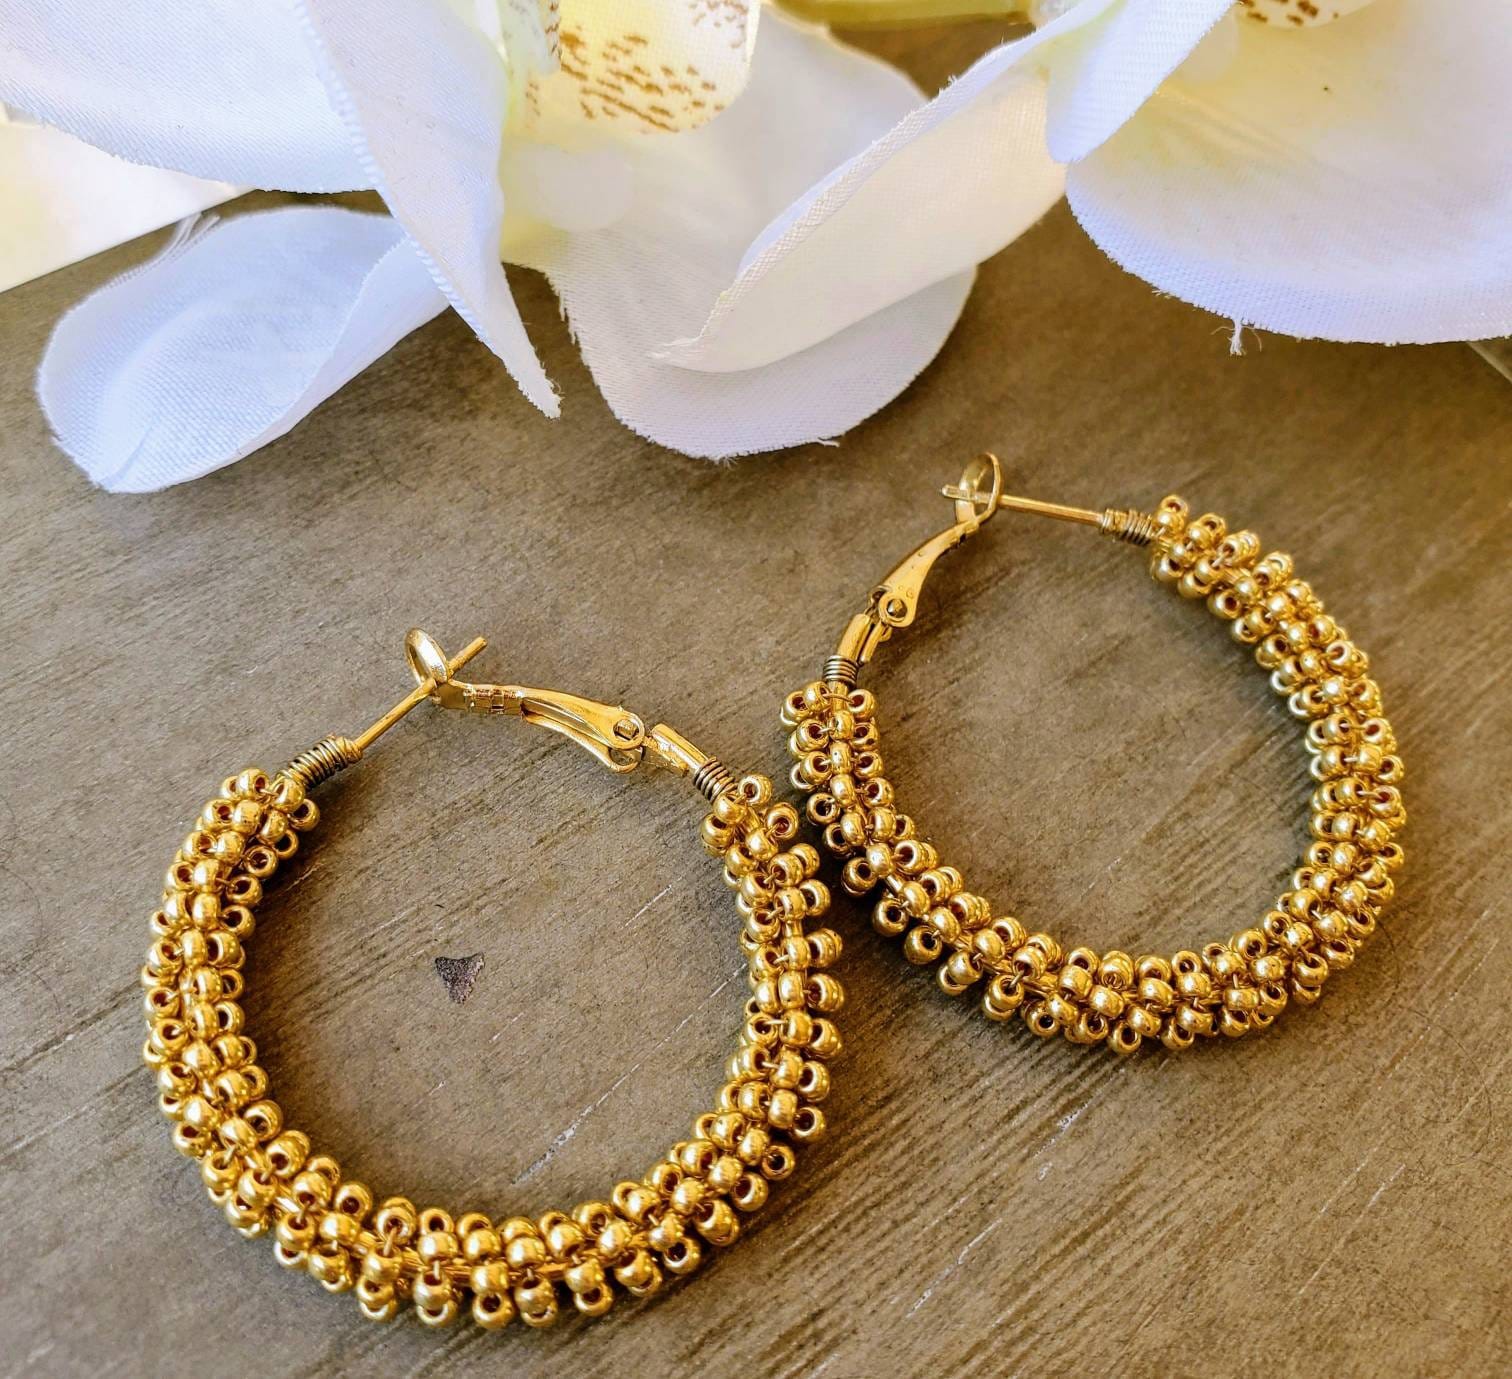 Oubaka 72pcs Beading Hoop Earrings for Jewelry Making,Round Beading Hoop Earrings Bulk Jewelry Making Supplies Jewelry Finding, Gold